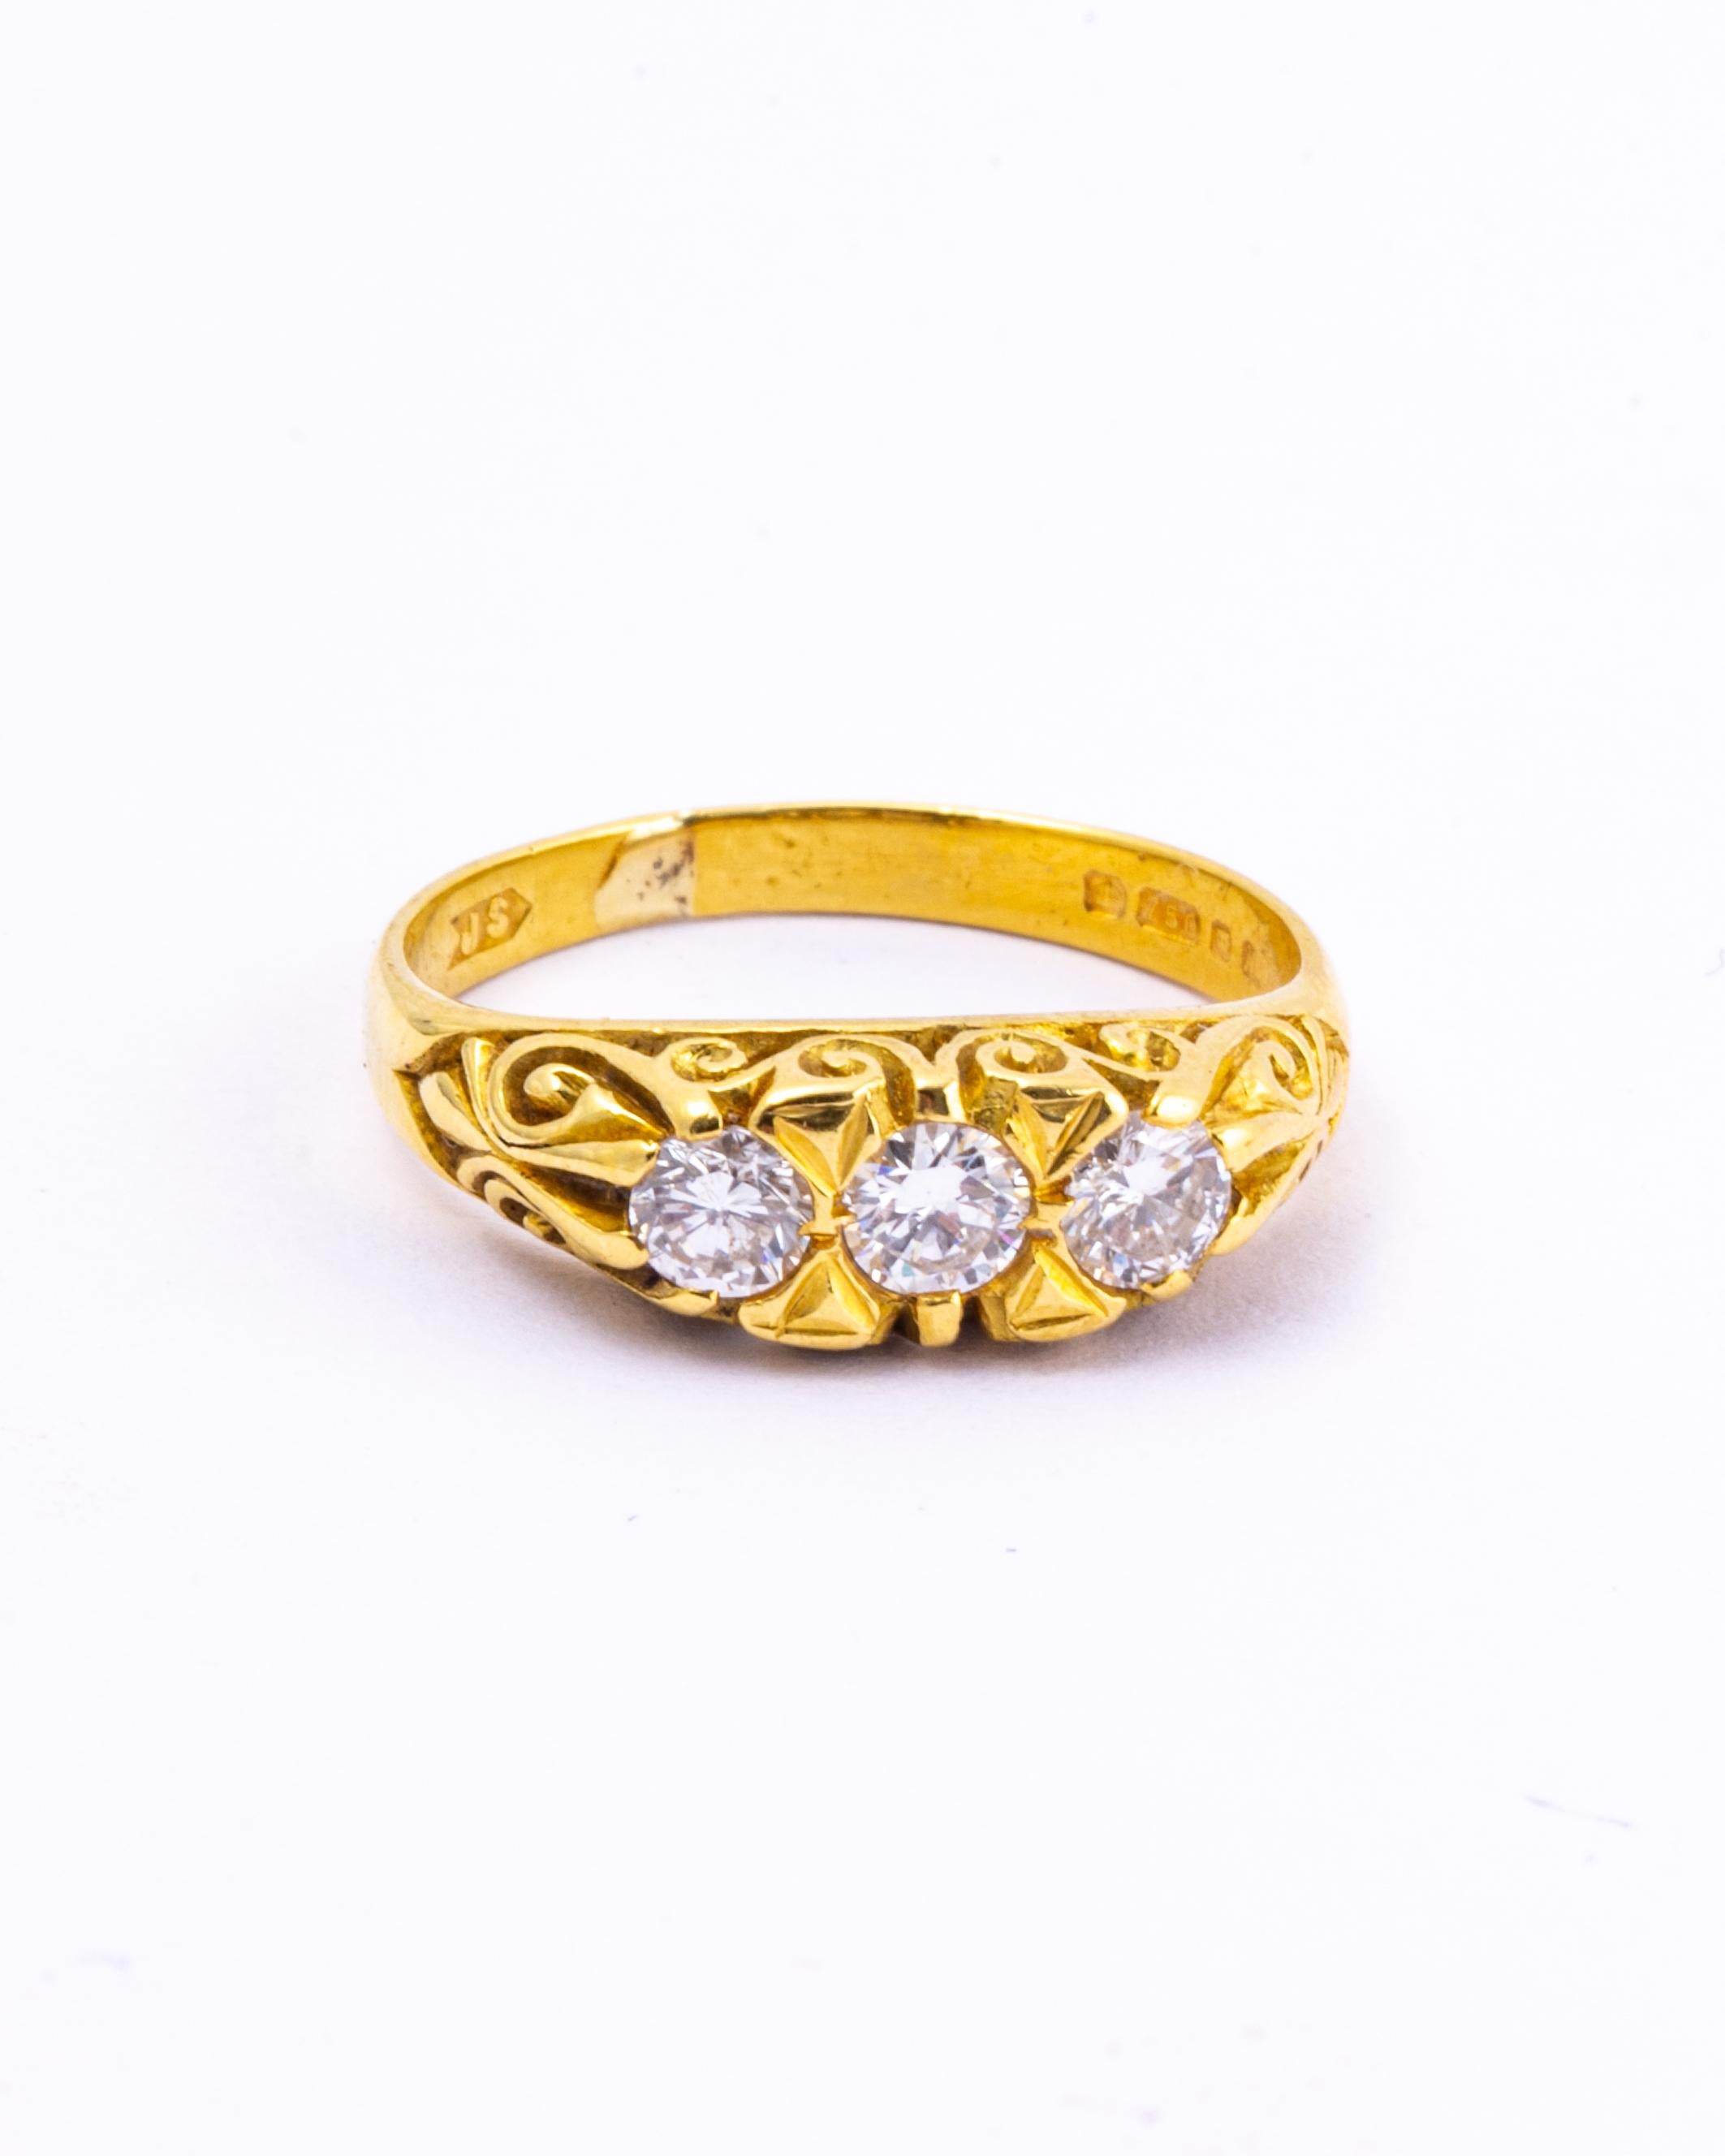 The design of this ring is a timeless classic. The three diamonds total approx 50pts and are all set within the ornate setting. The diamonds are bright and wonderfully sparkly and the ring is modelled in 18ct gold.  

Ring Size: L 1/2 or 6 
Widest